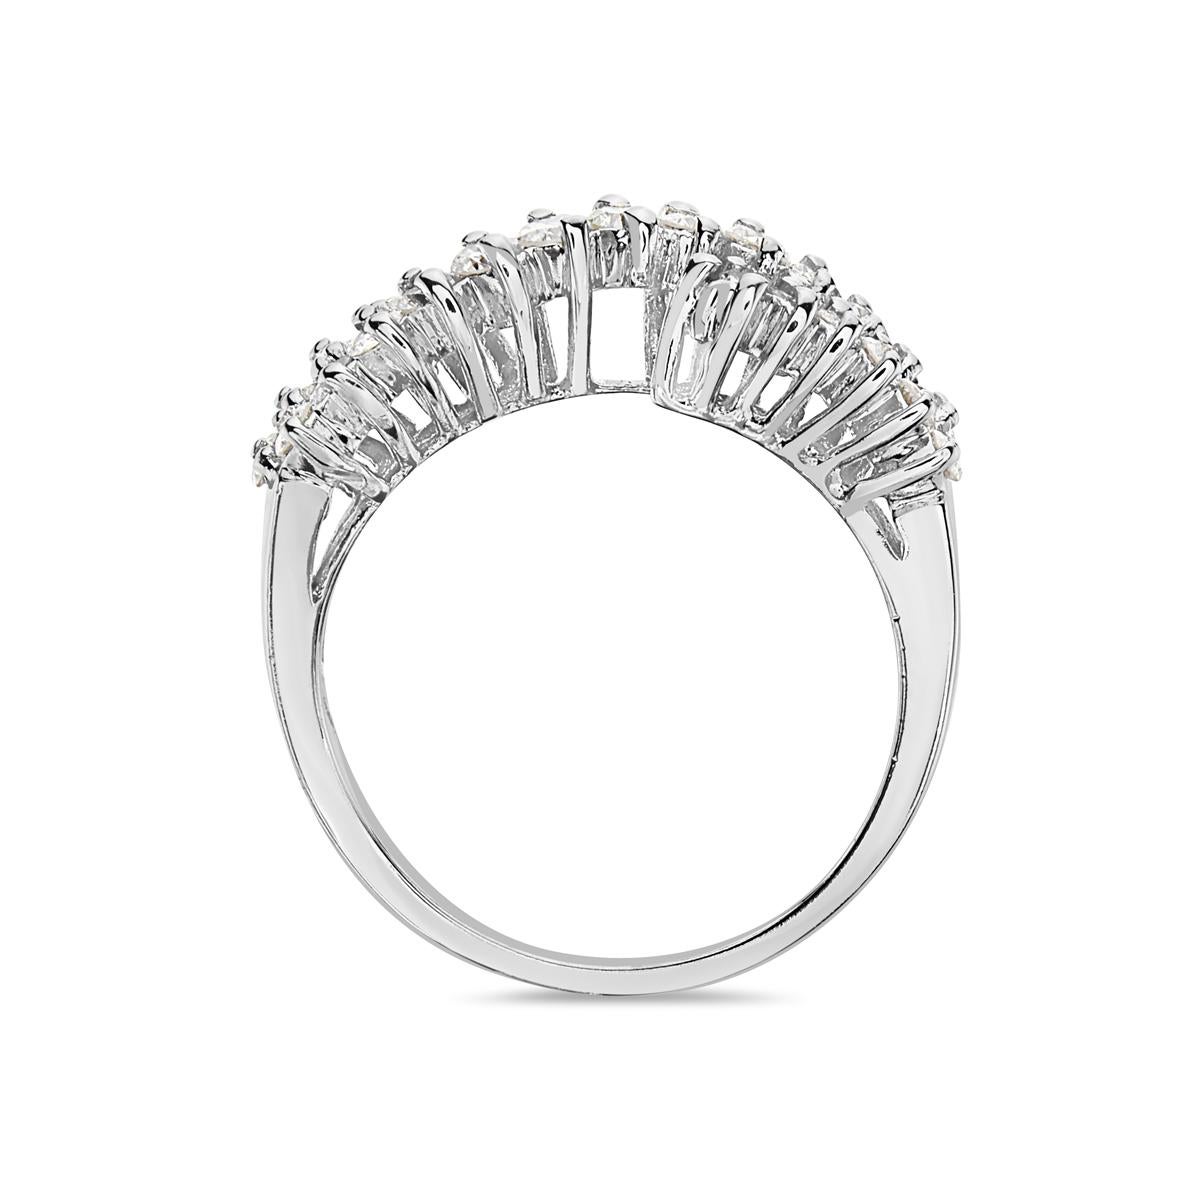 This cocktail ring features 0.85 carats of diamonds set in 14K white gold. 25 total diamonds. 5 grams total weight. Size 7.5.

Resizeable upon request.

Viewings available in our NYC showroom by appointment.